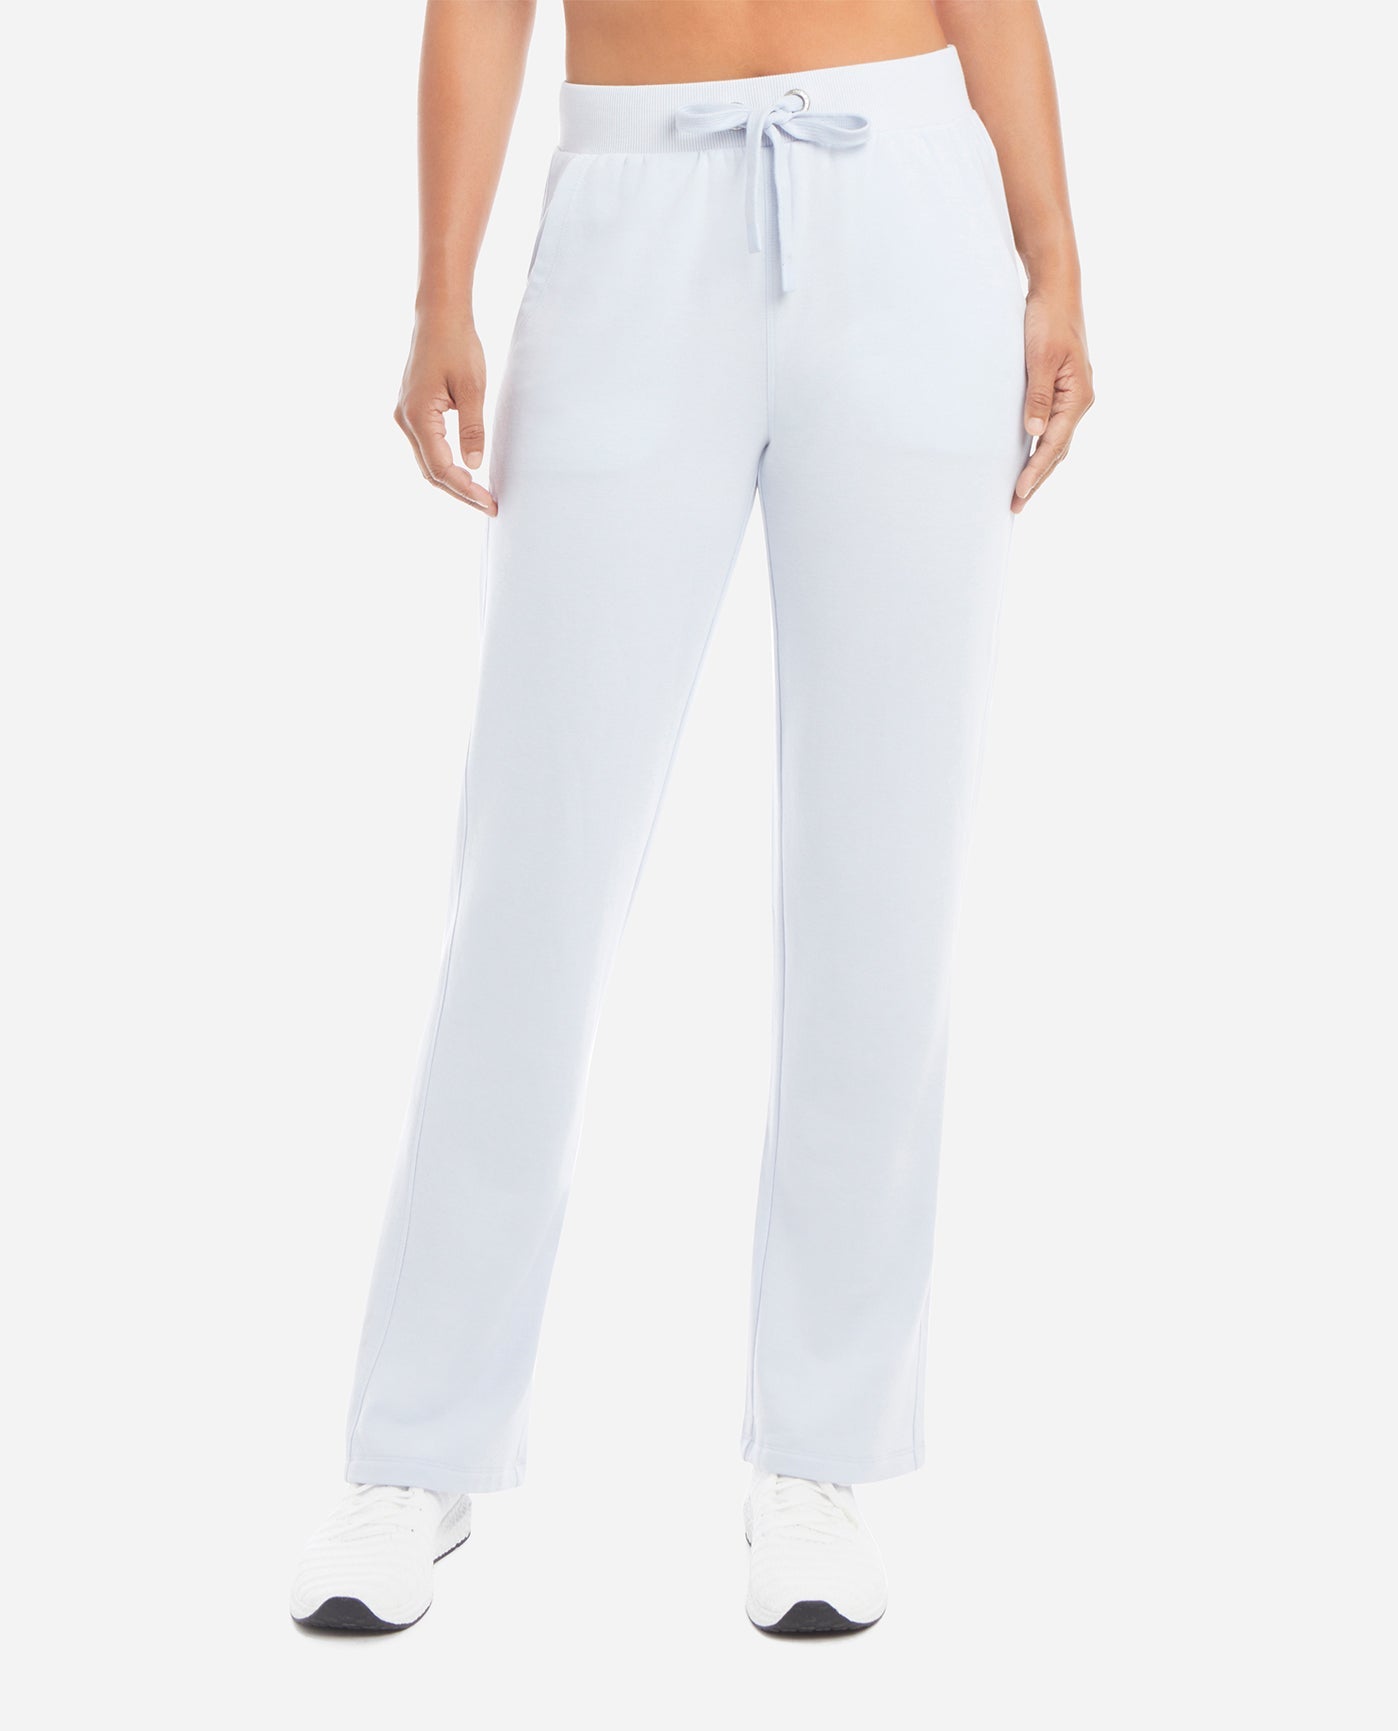 Danskin Now Women's Athleisure Knit Pant Available in Regular and